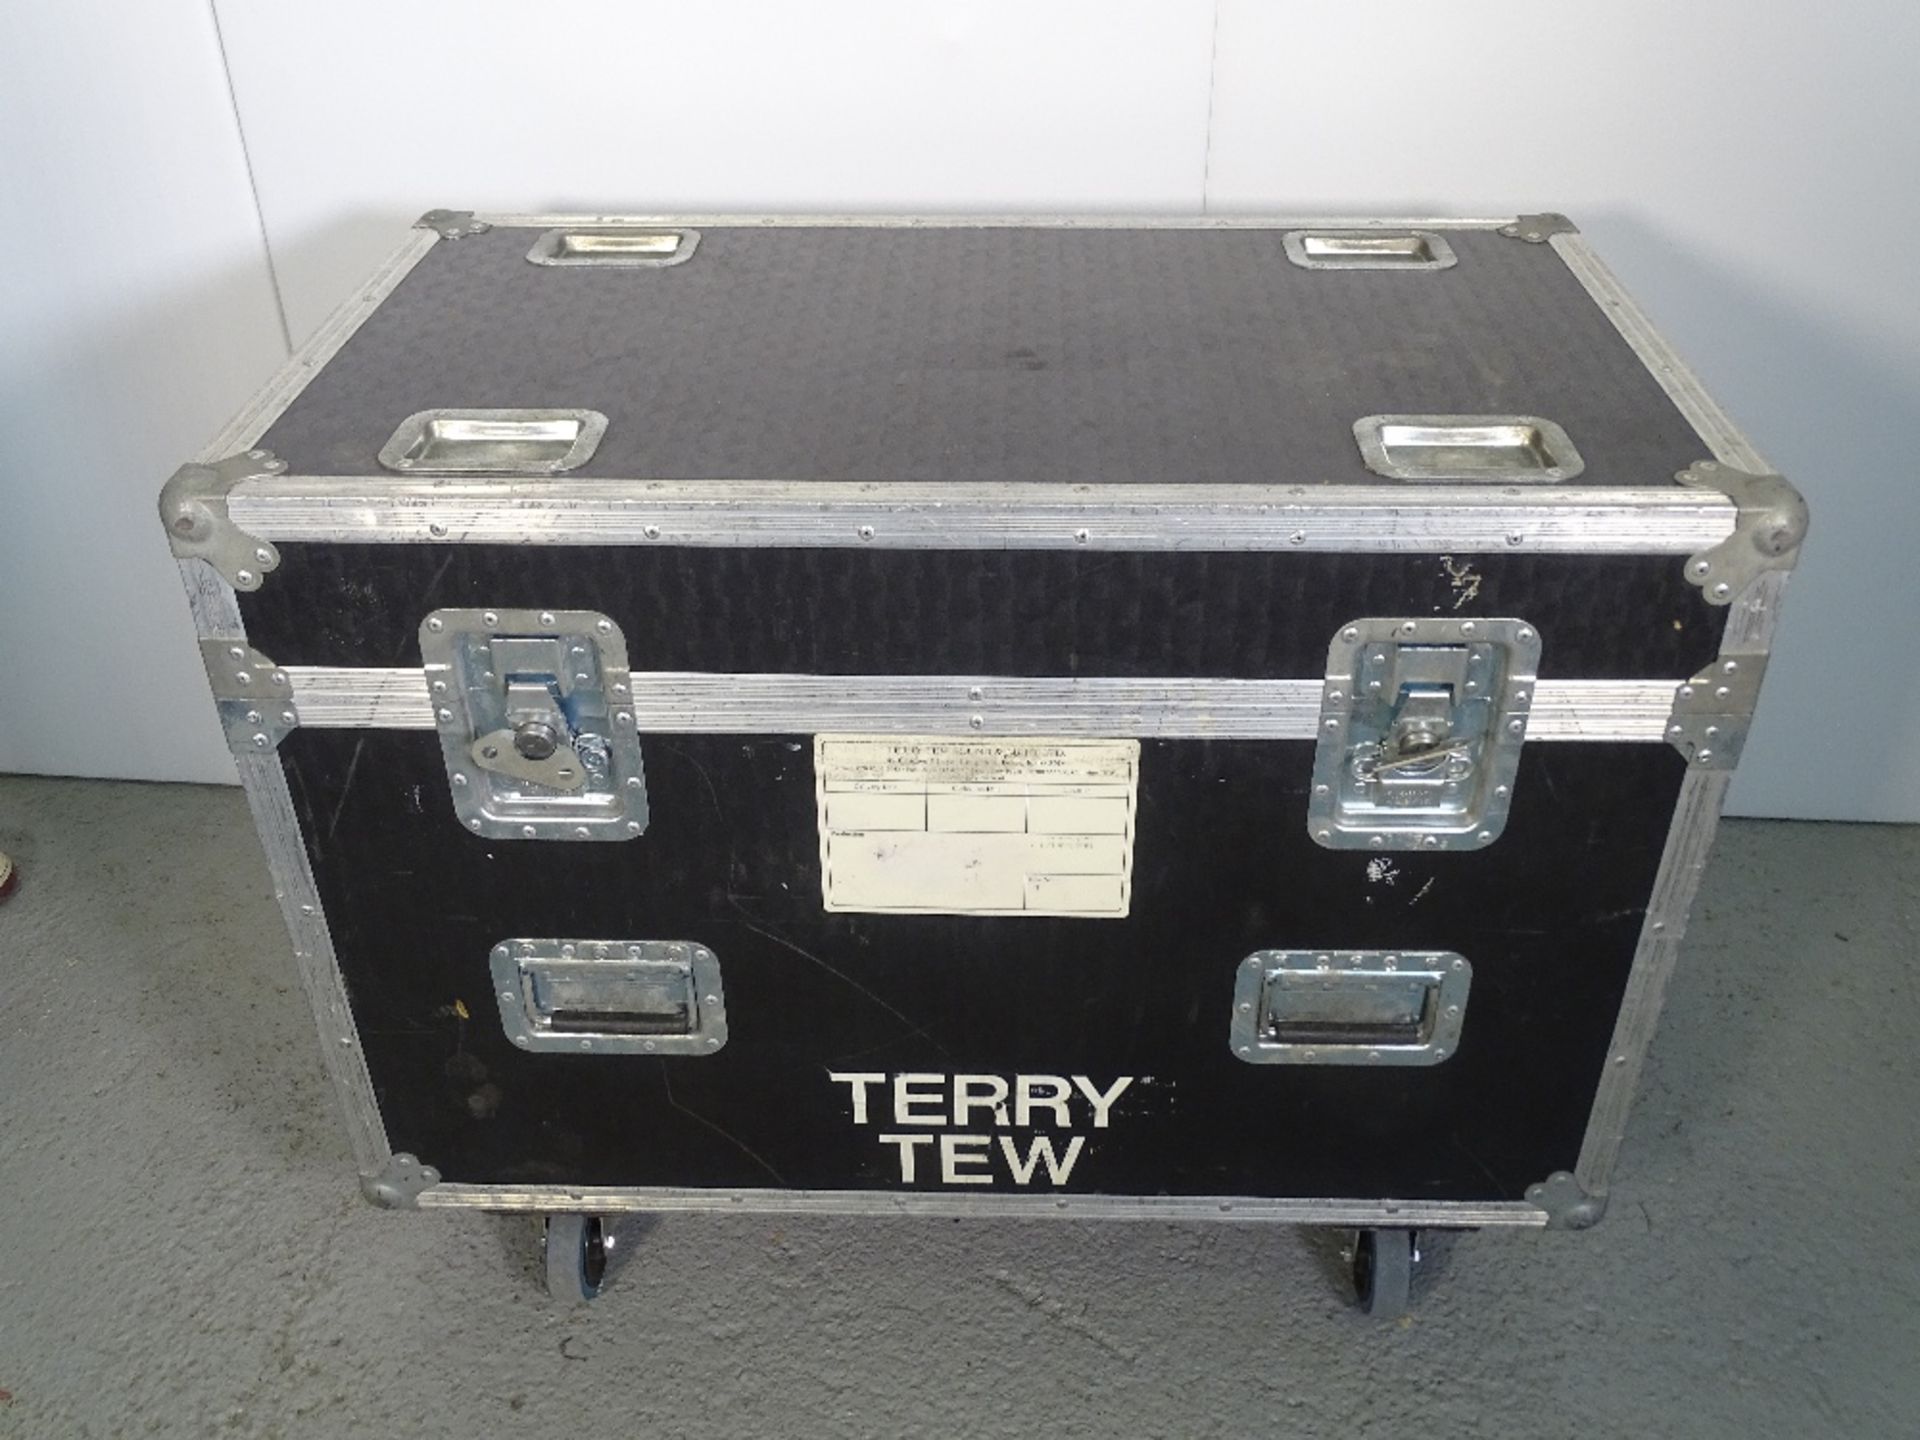 A Martin Lighting MAC 250 KRYPTON Twin Kit flight cased, includes 4 Doughty hanging clamps and power